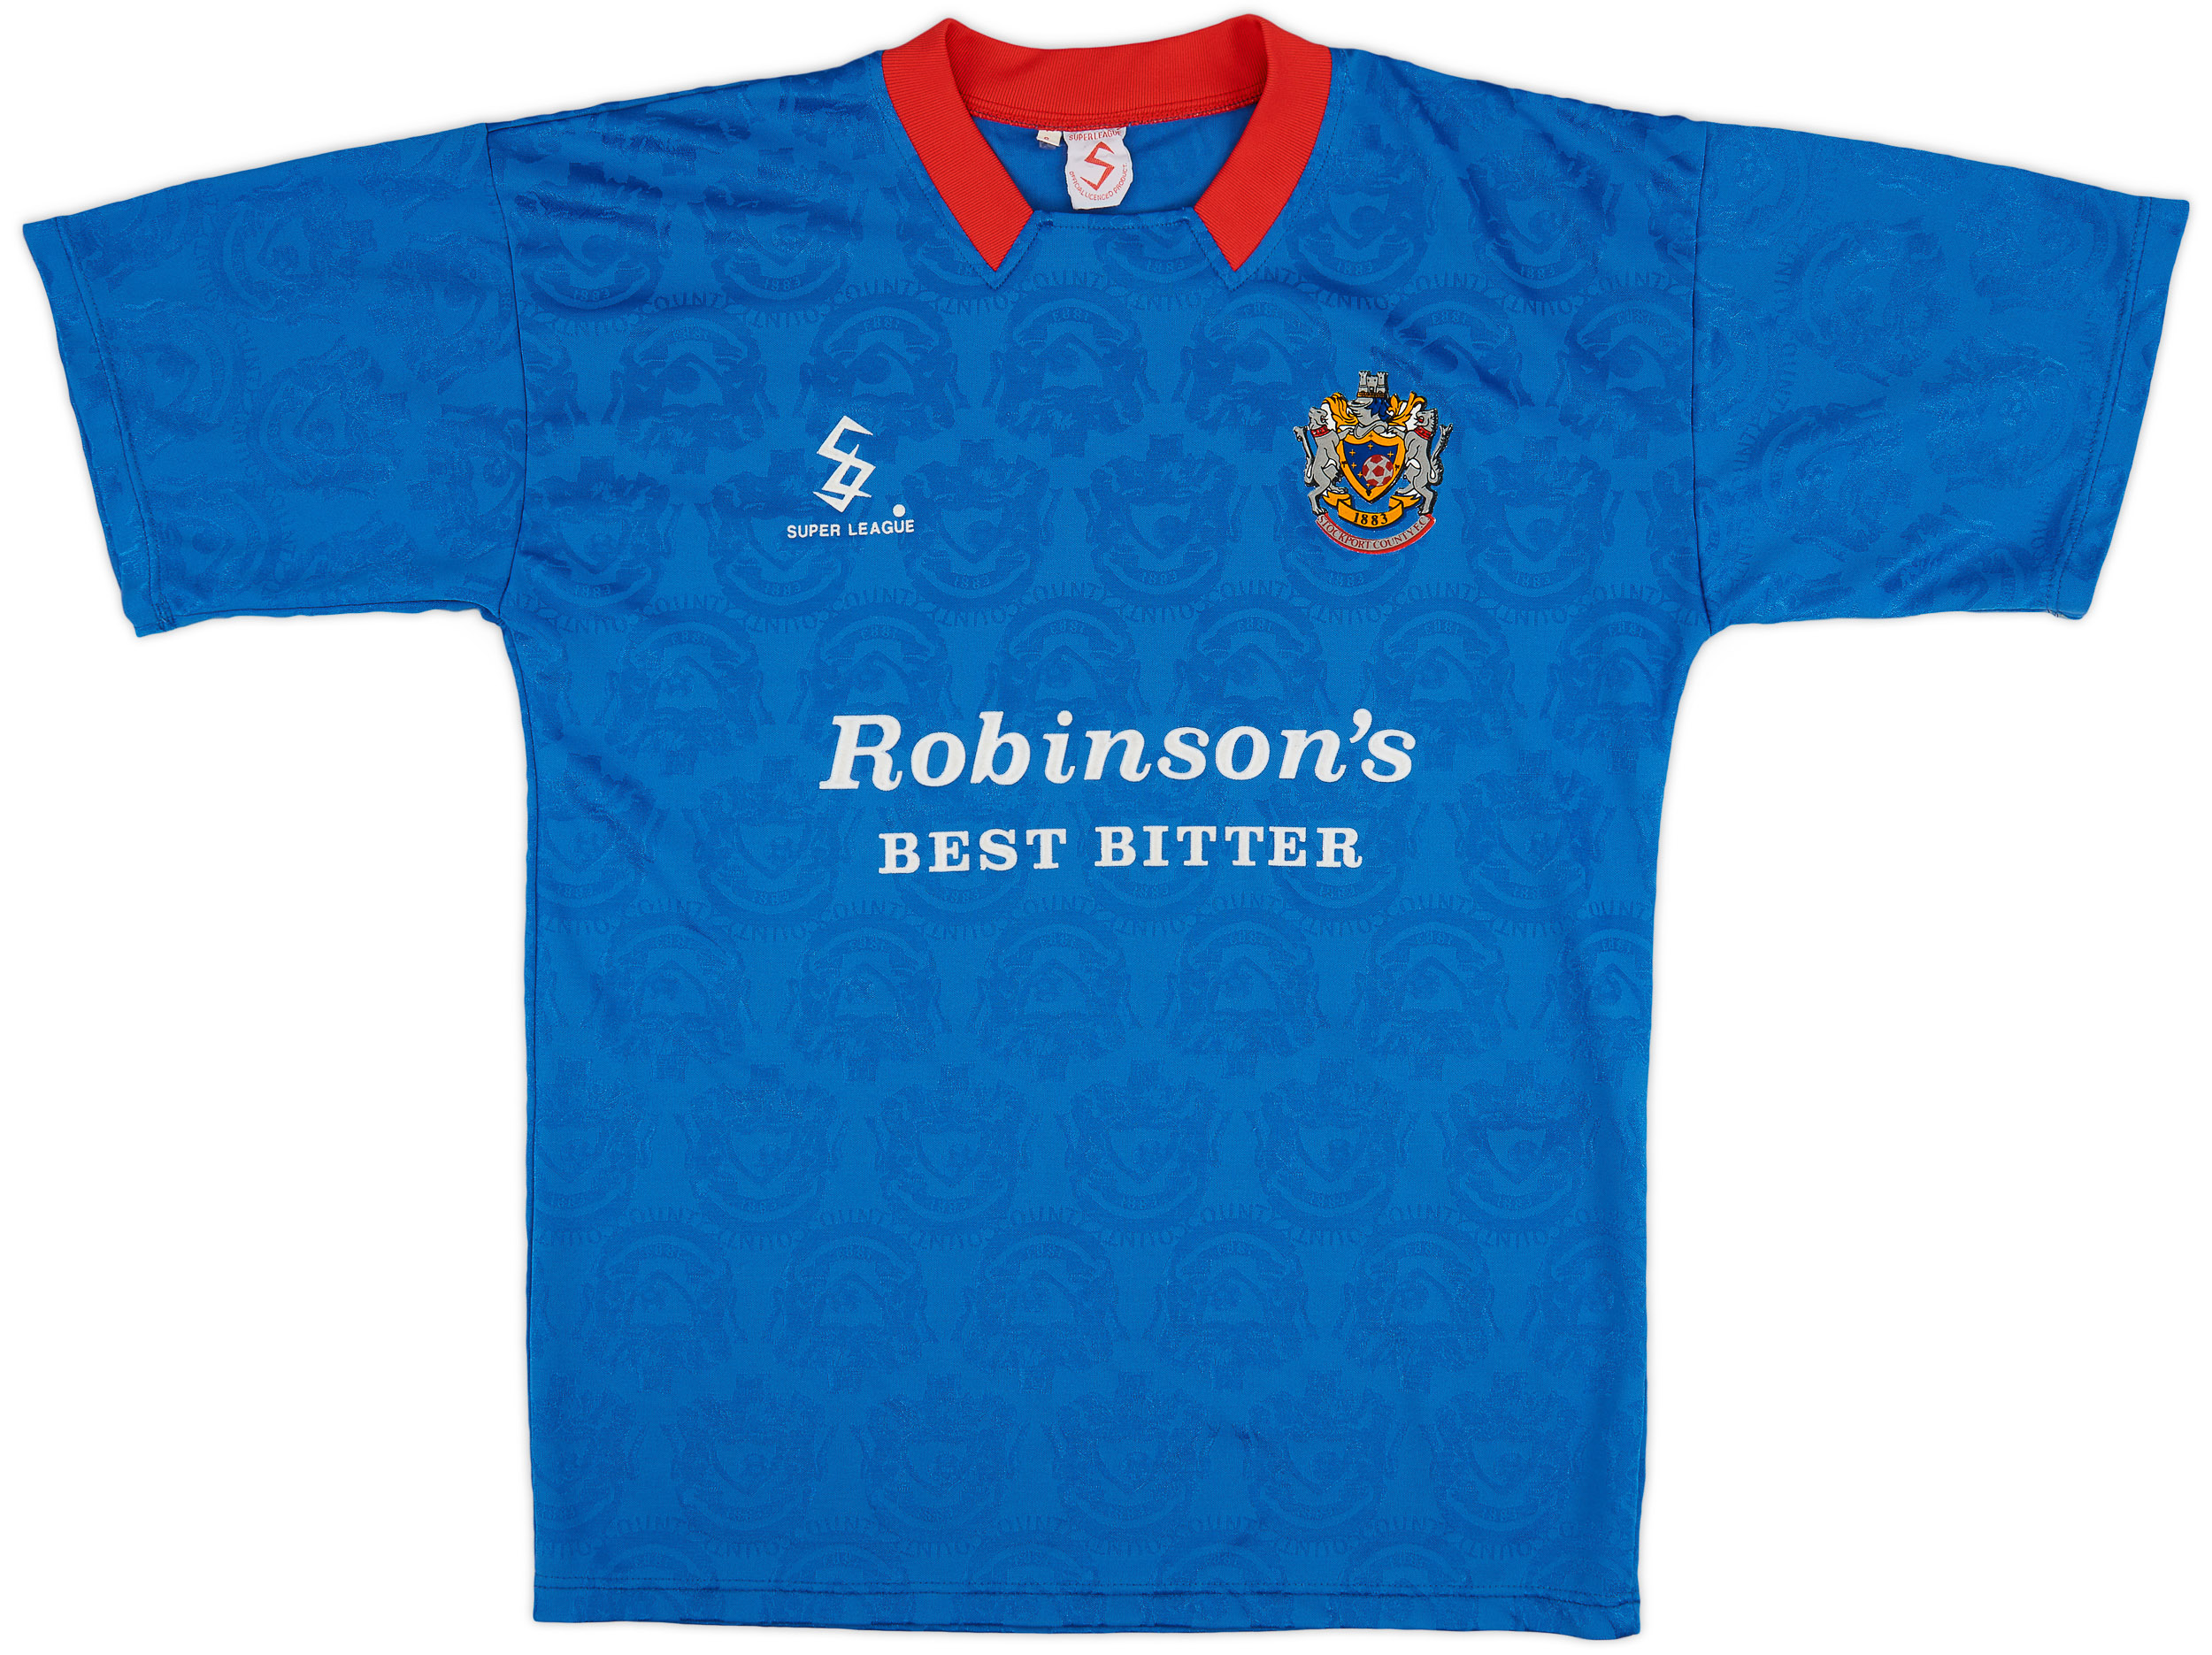 1994-95 Stockport County Home Shirt - 10/10 - ()